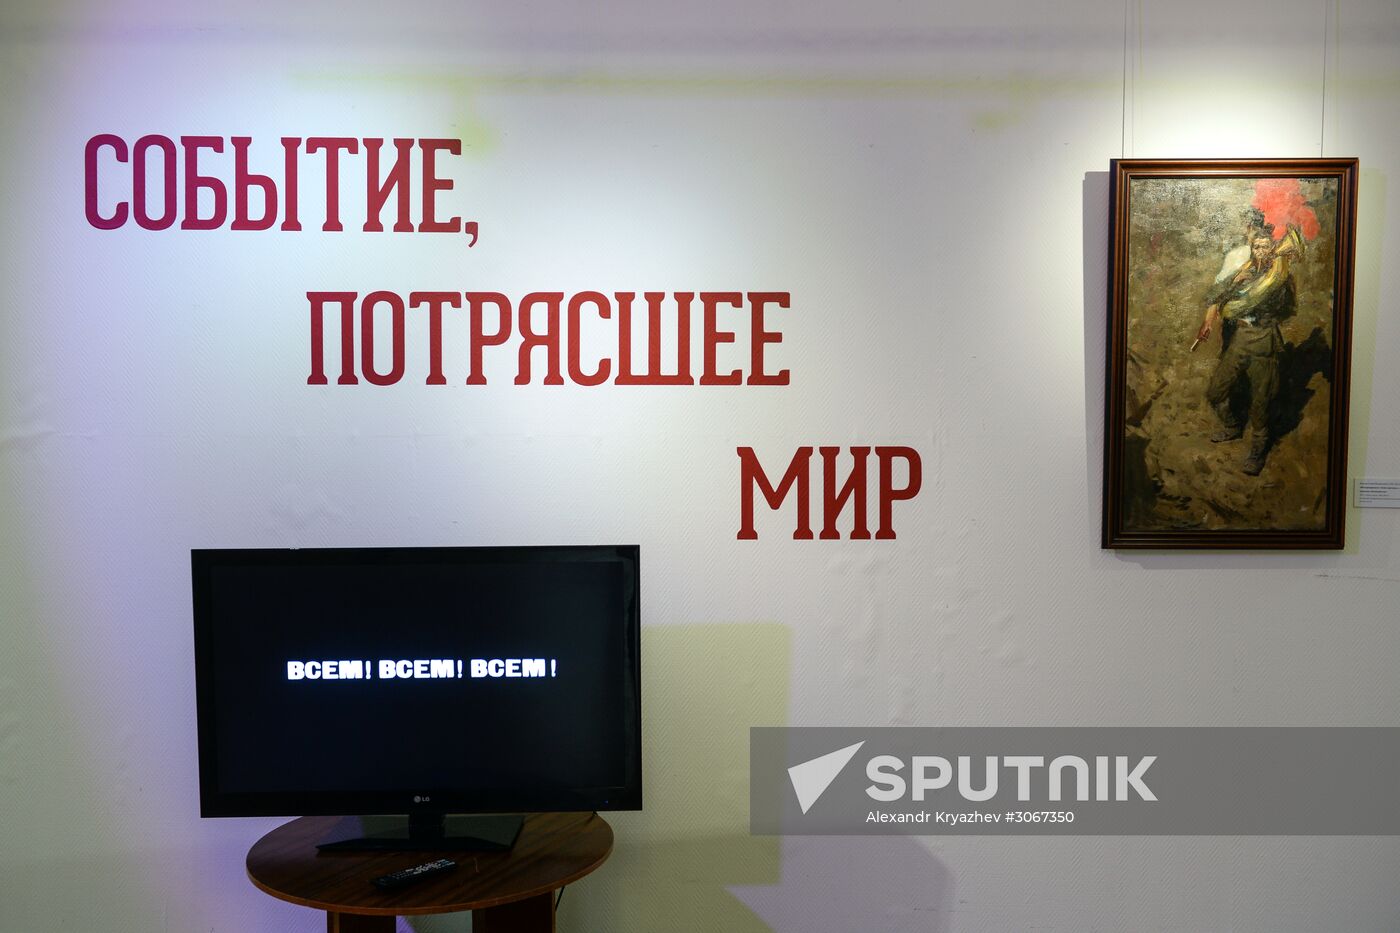 Exhibition "Event that shook the world" opens in Novosibirsk